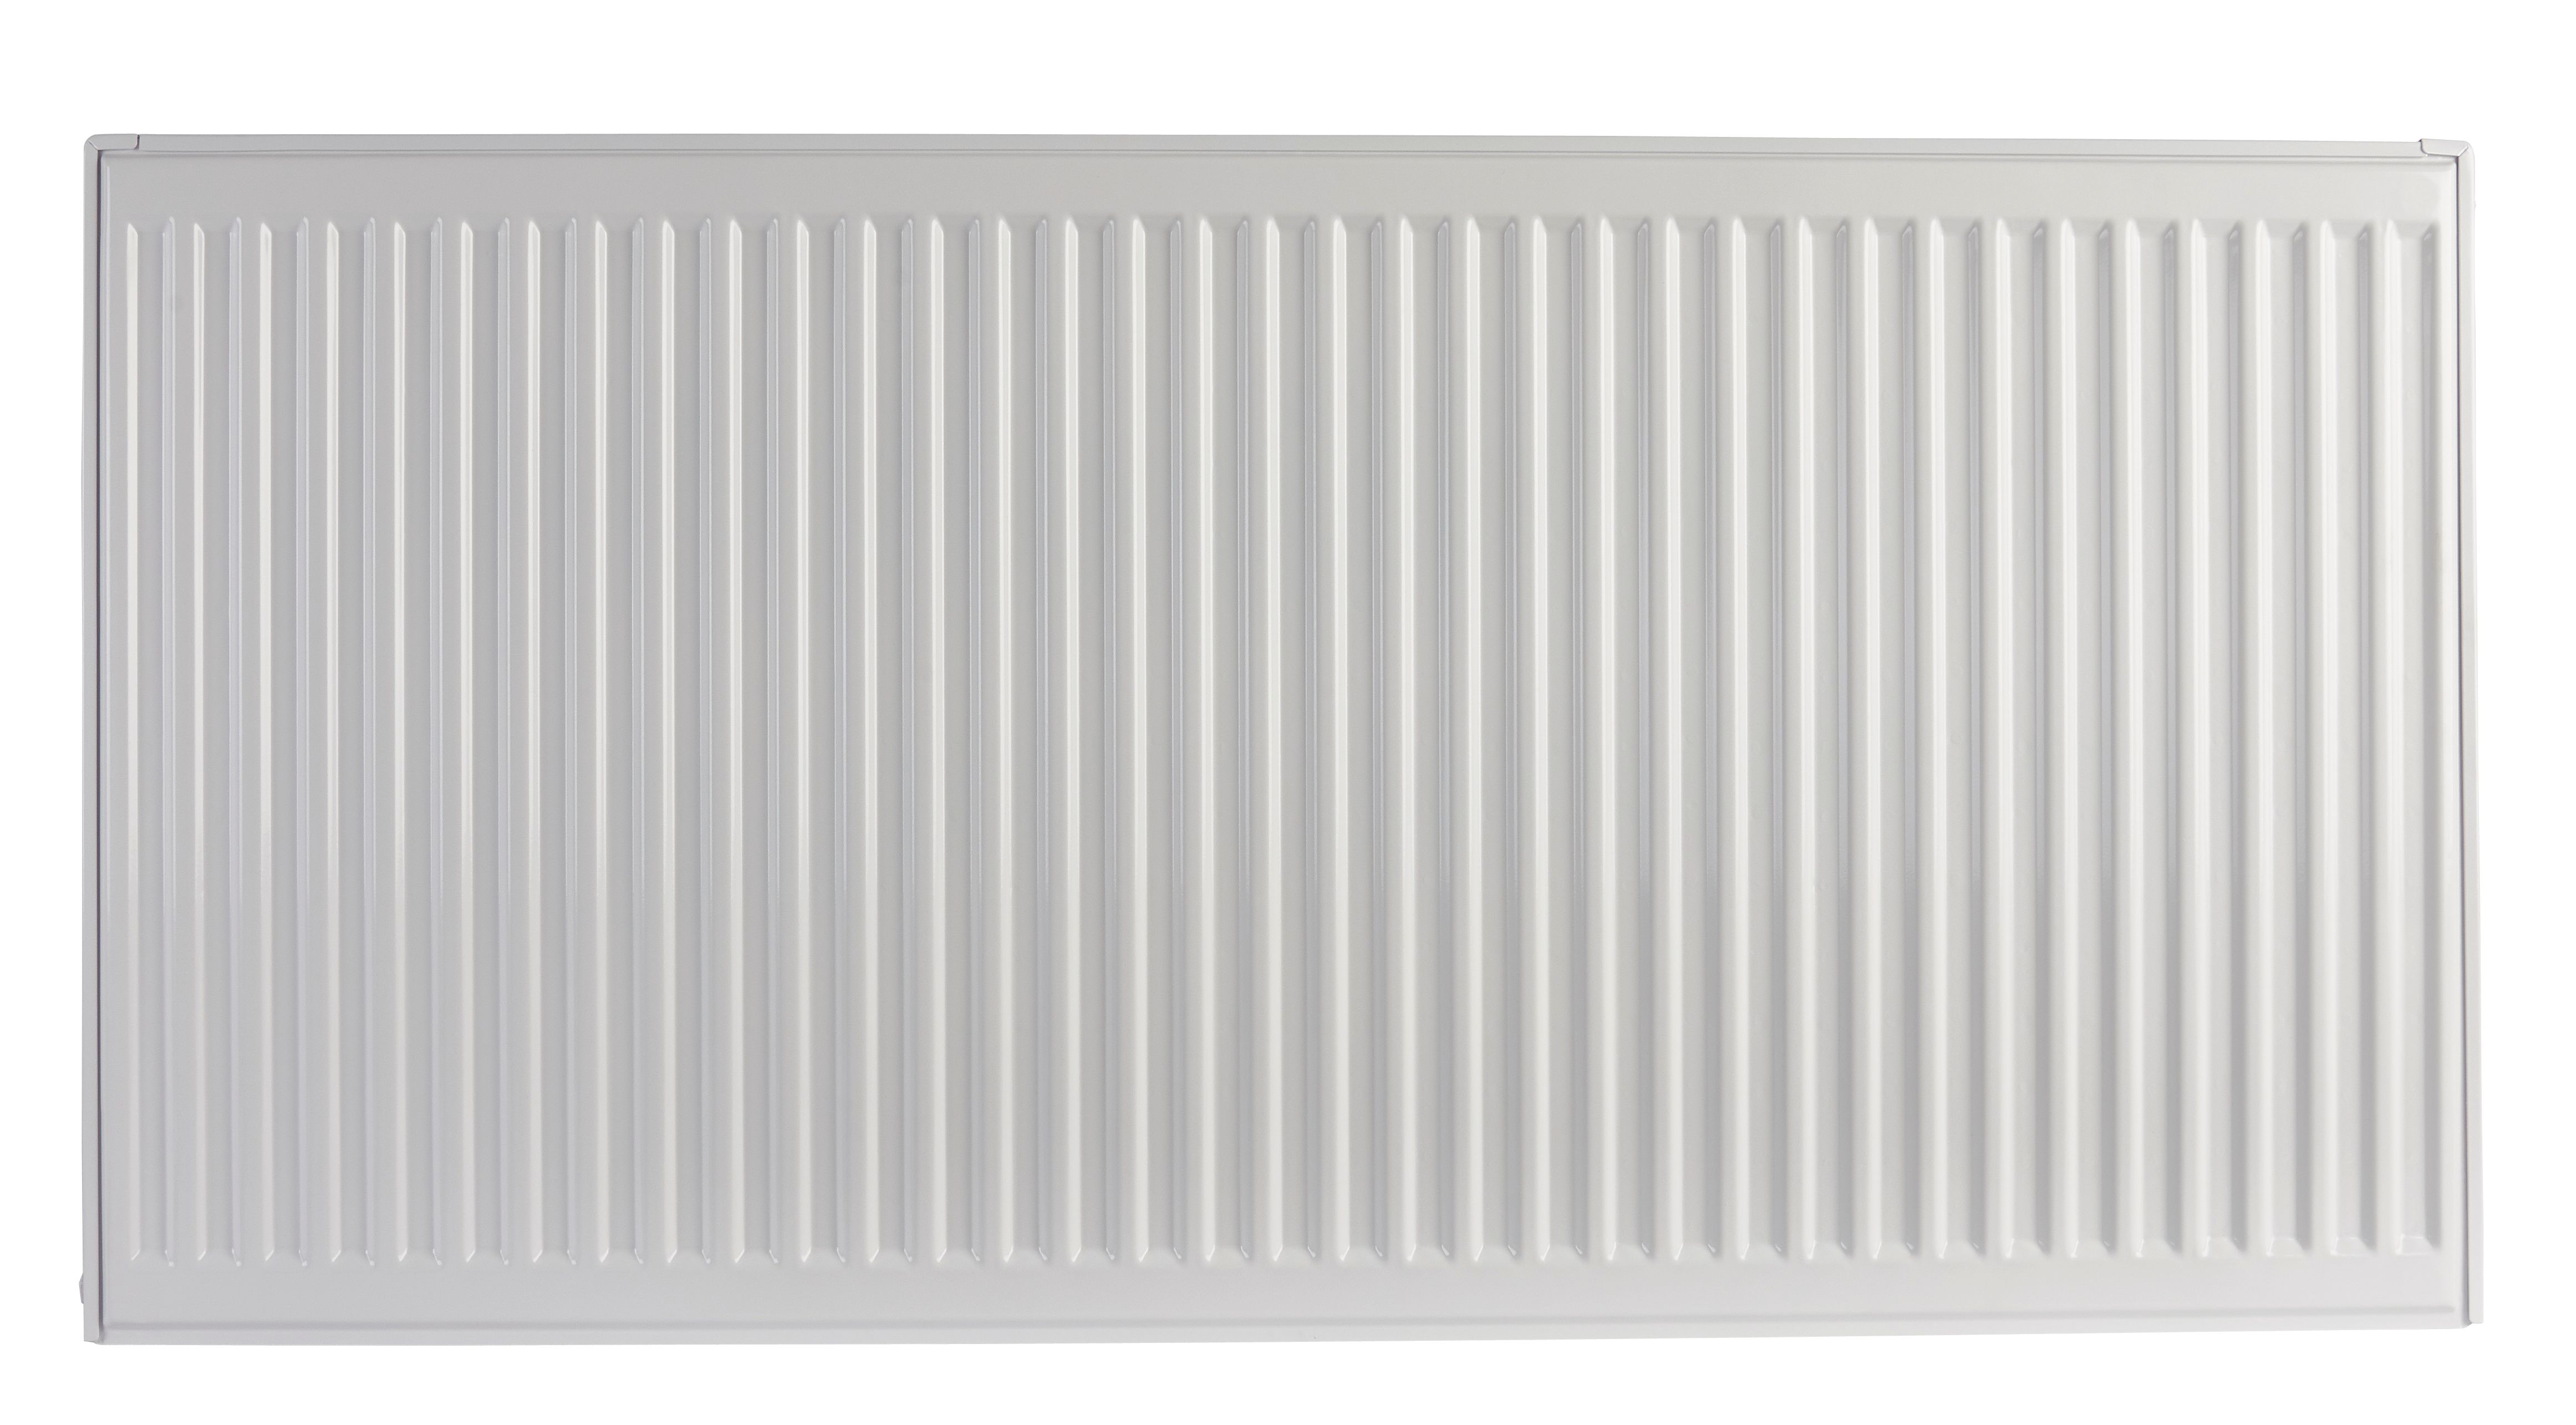 Homeline by Stelrad 500 x 1400mm Type 21 Double Panel Plus Single Convector Radiator